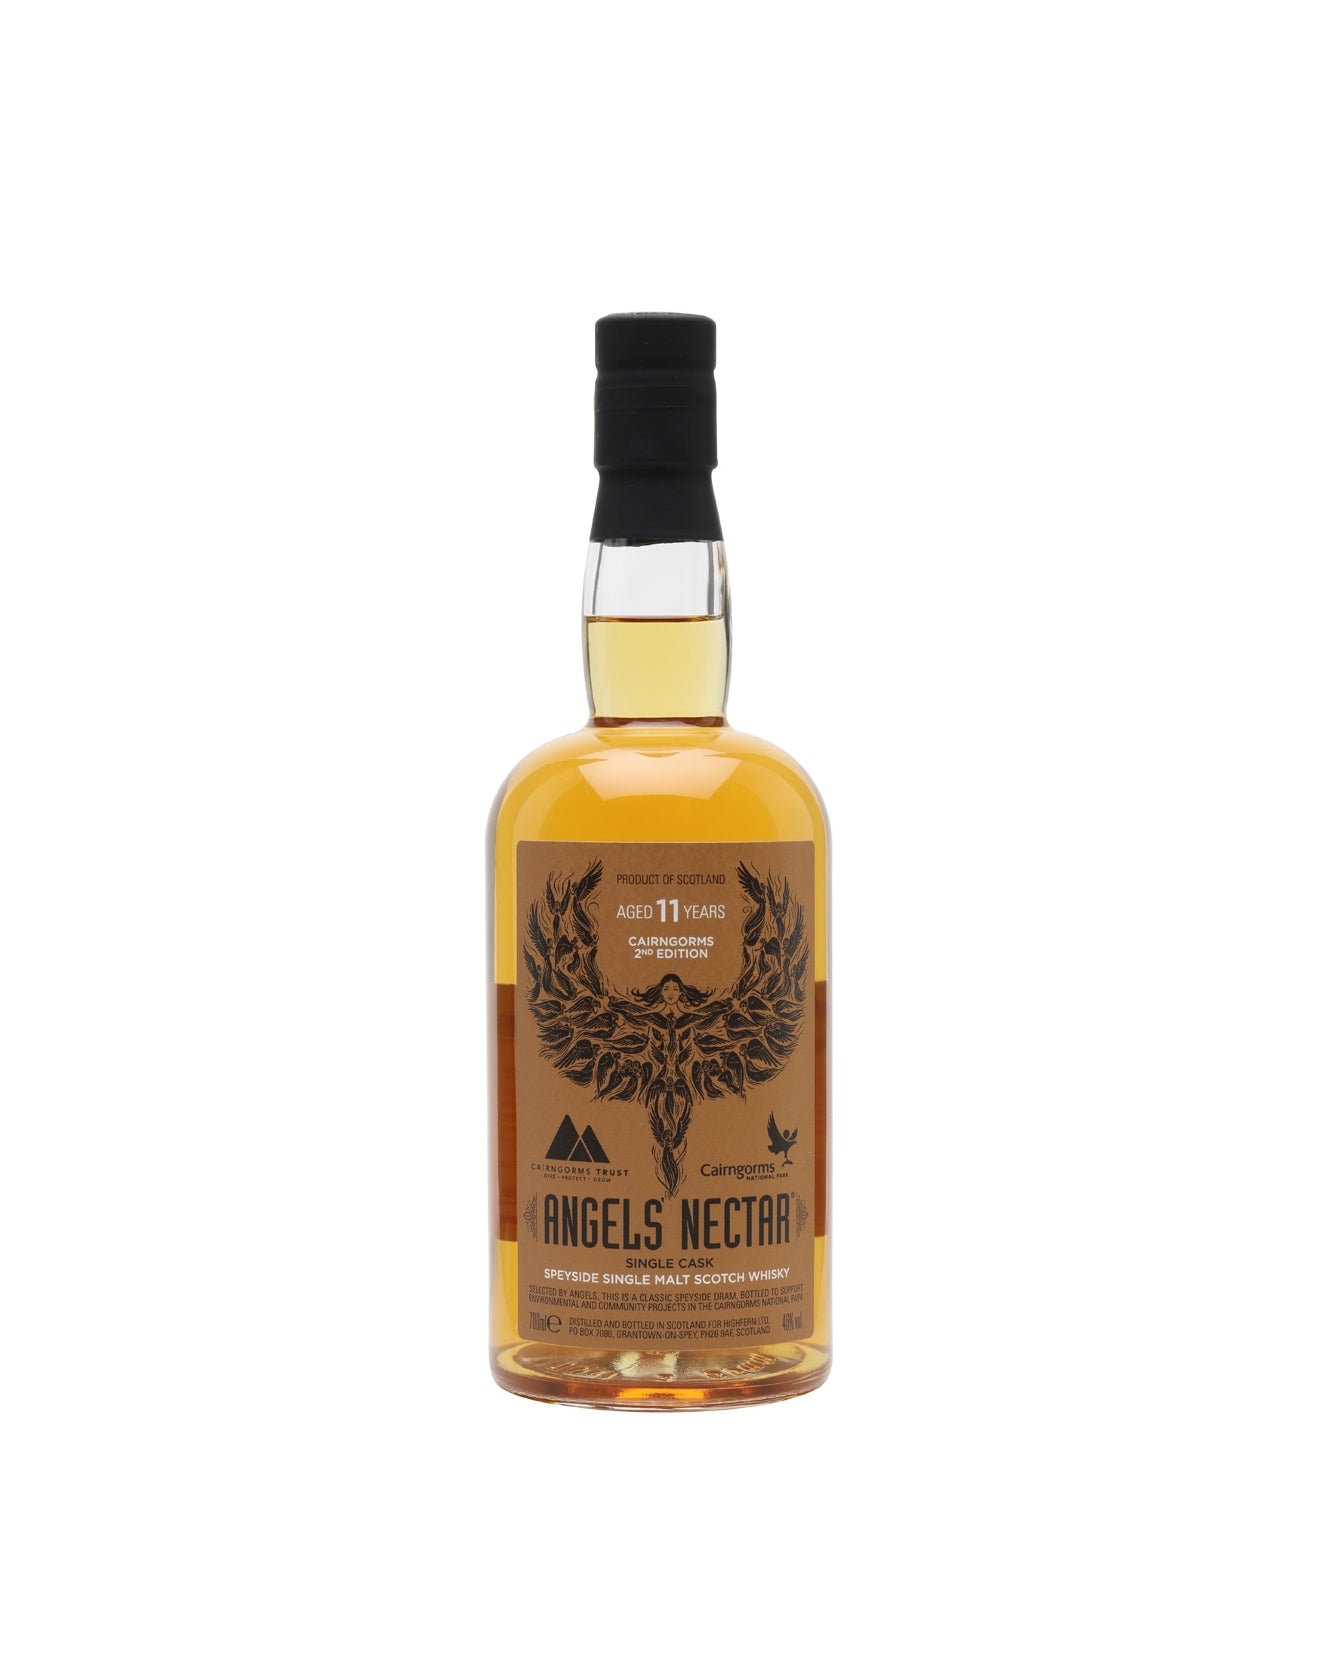 Angels Nectar Cairngorms 2nd edition 11 year old, Single Malt Whisky, 70cl